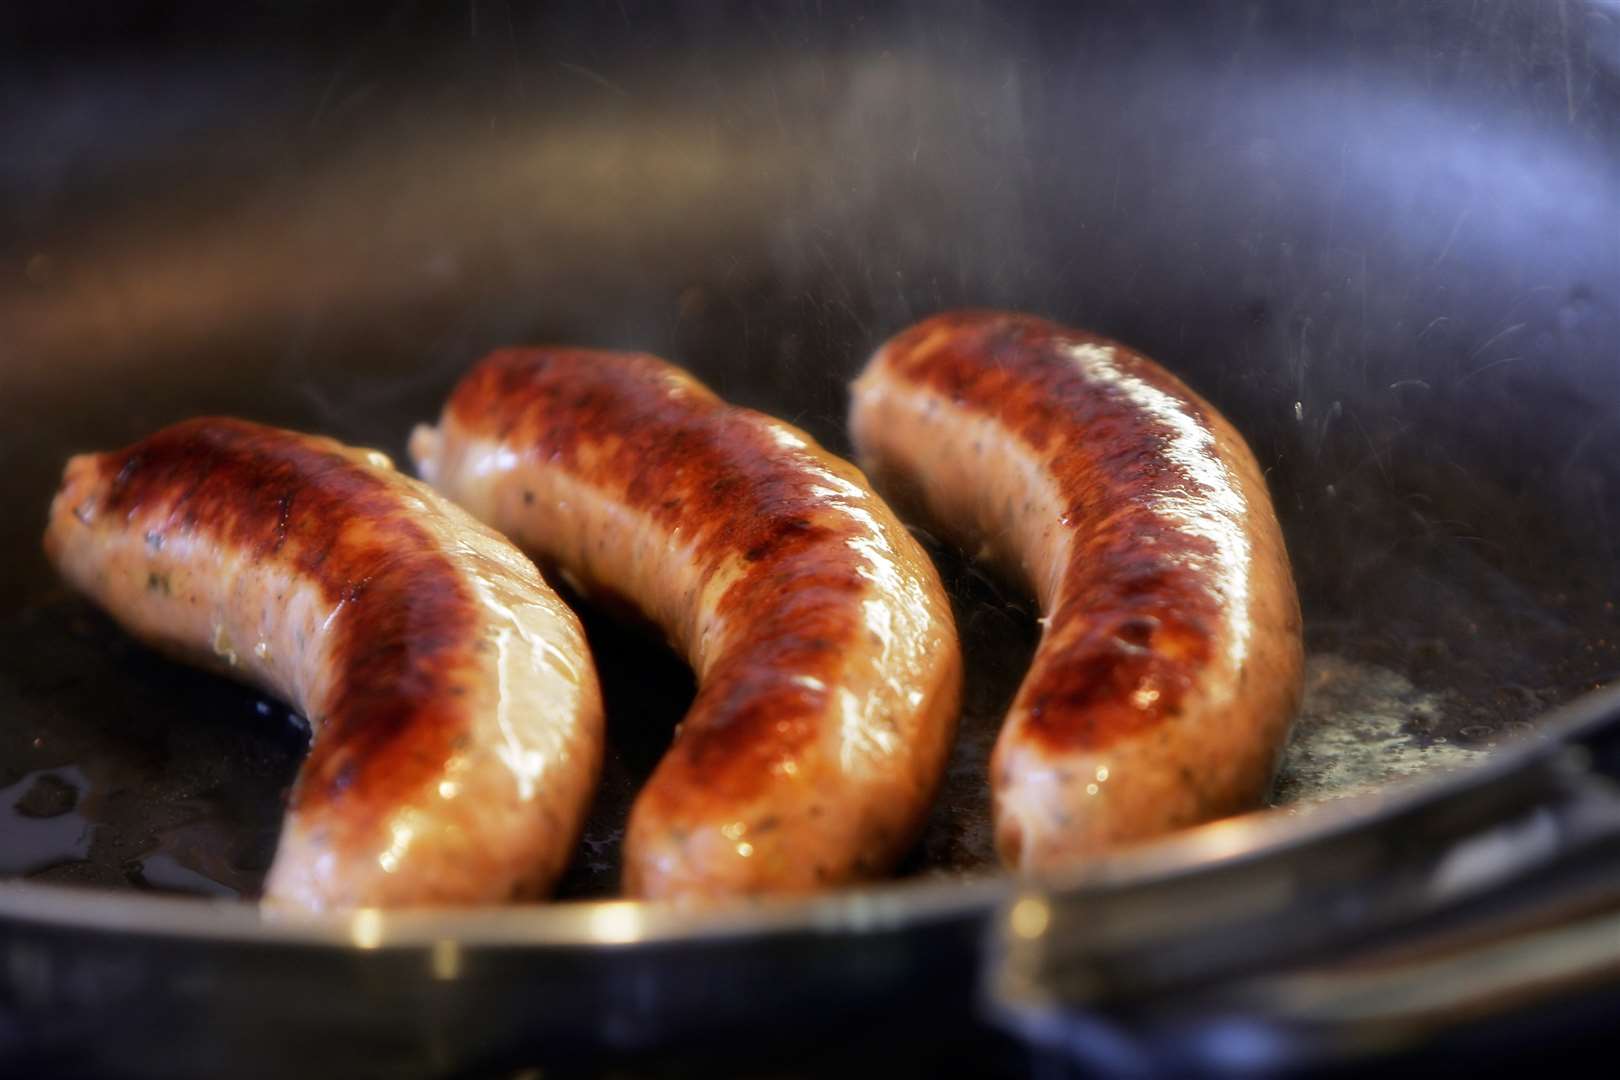 Sausages could be off the menu